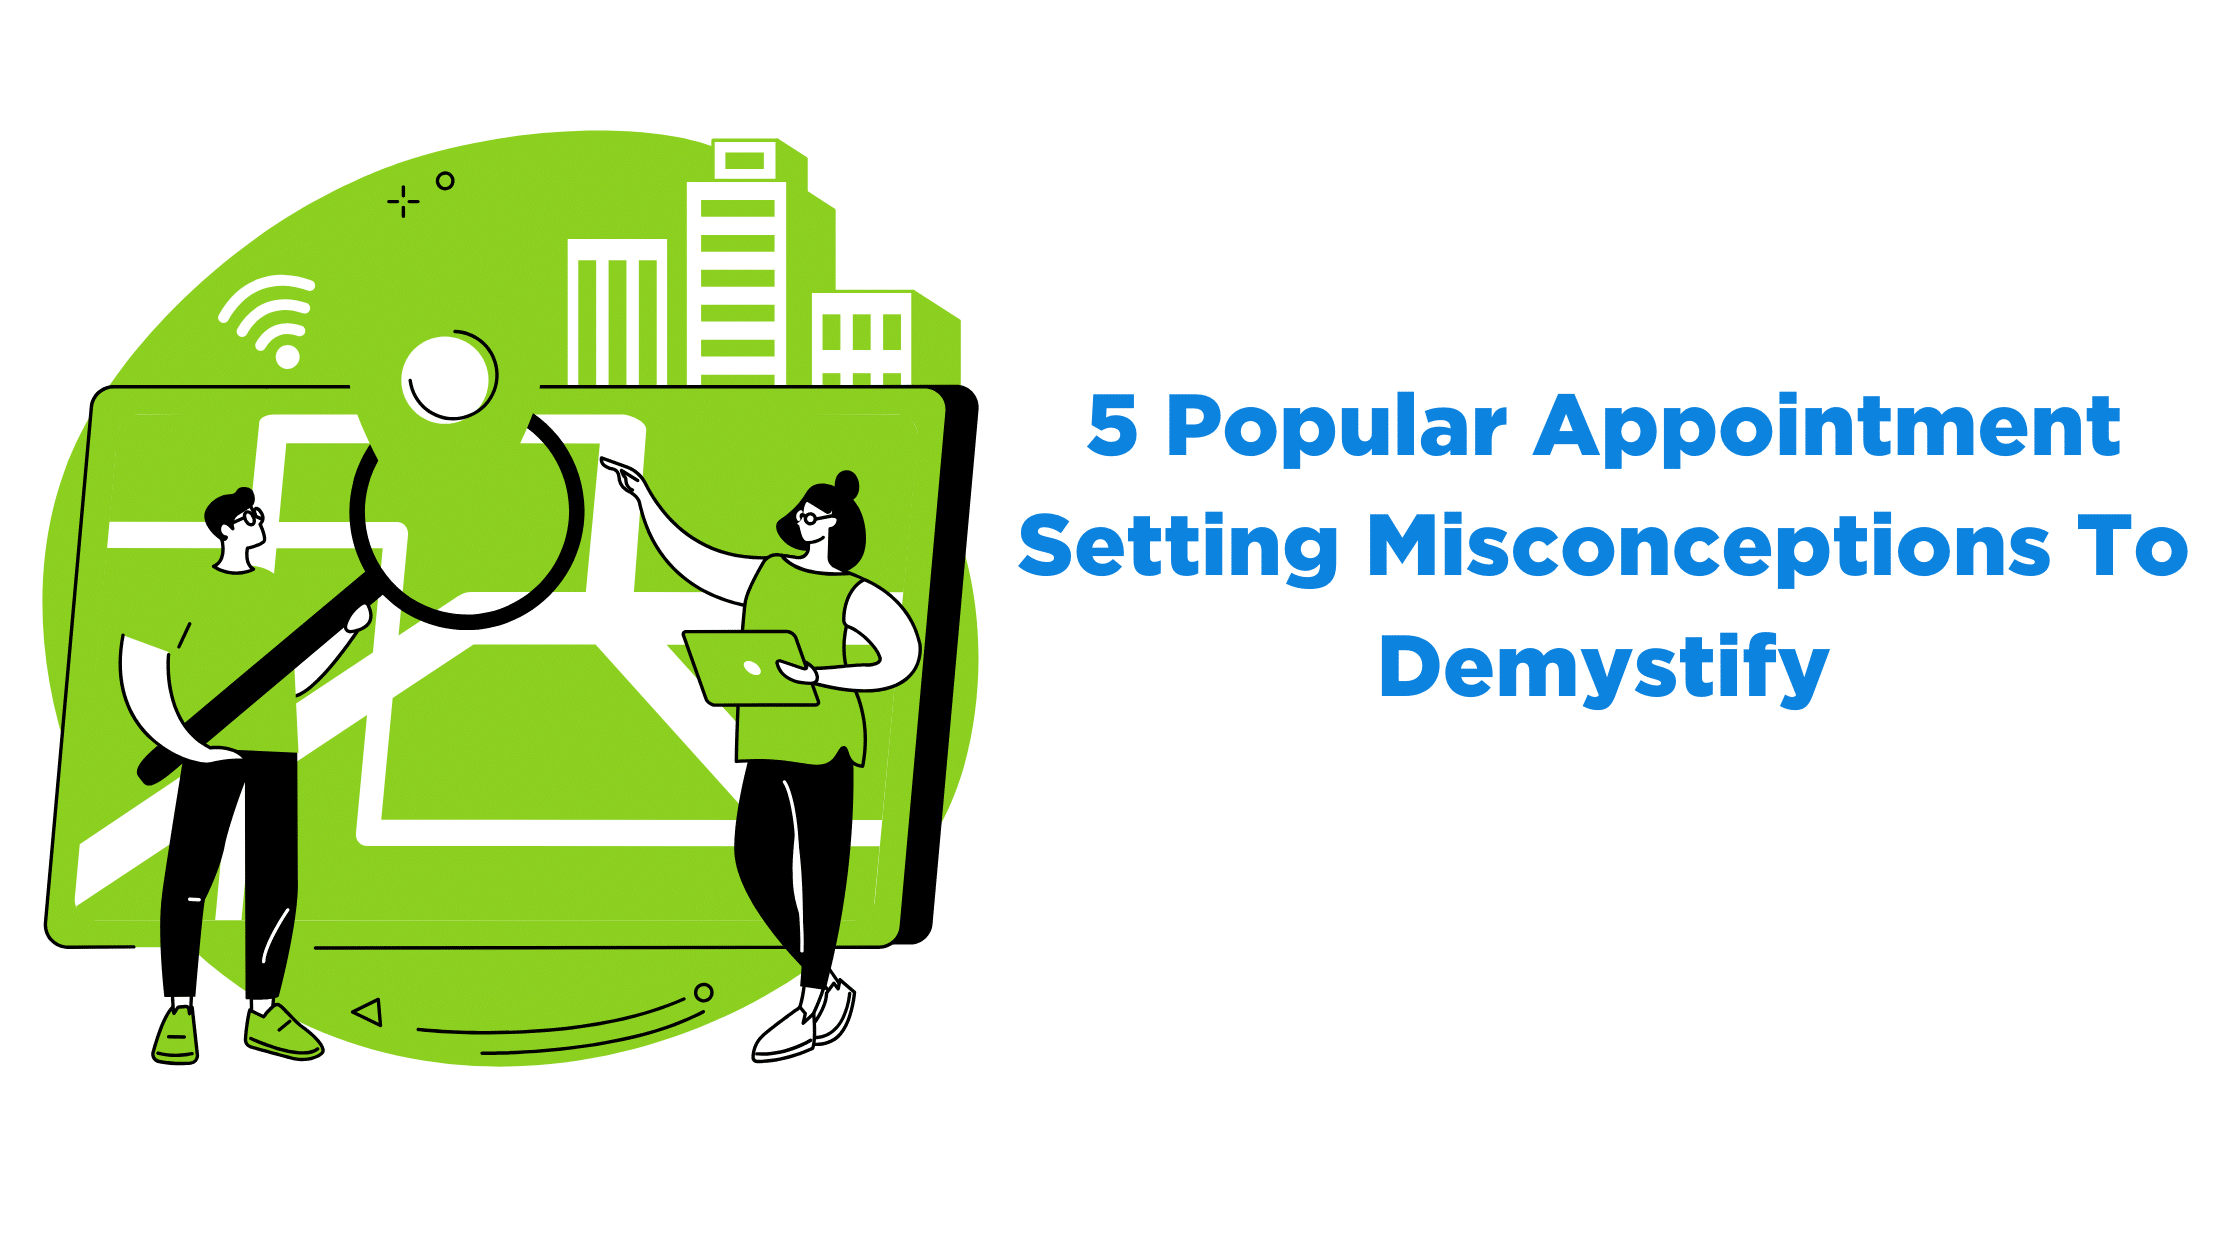 5 Popular Appointment Setting Misconceptions To Demystify